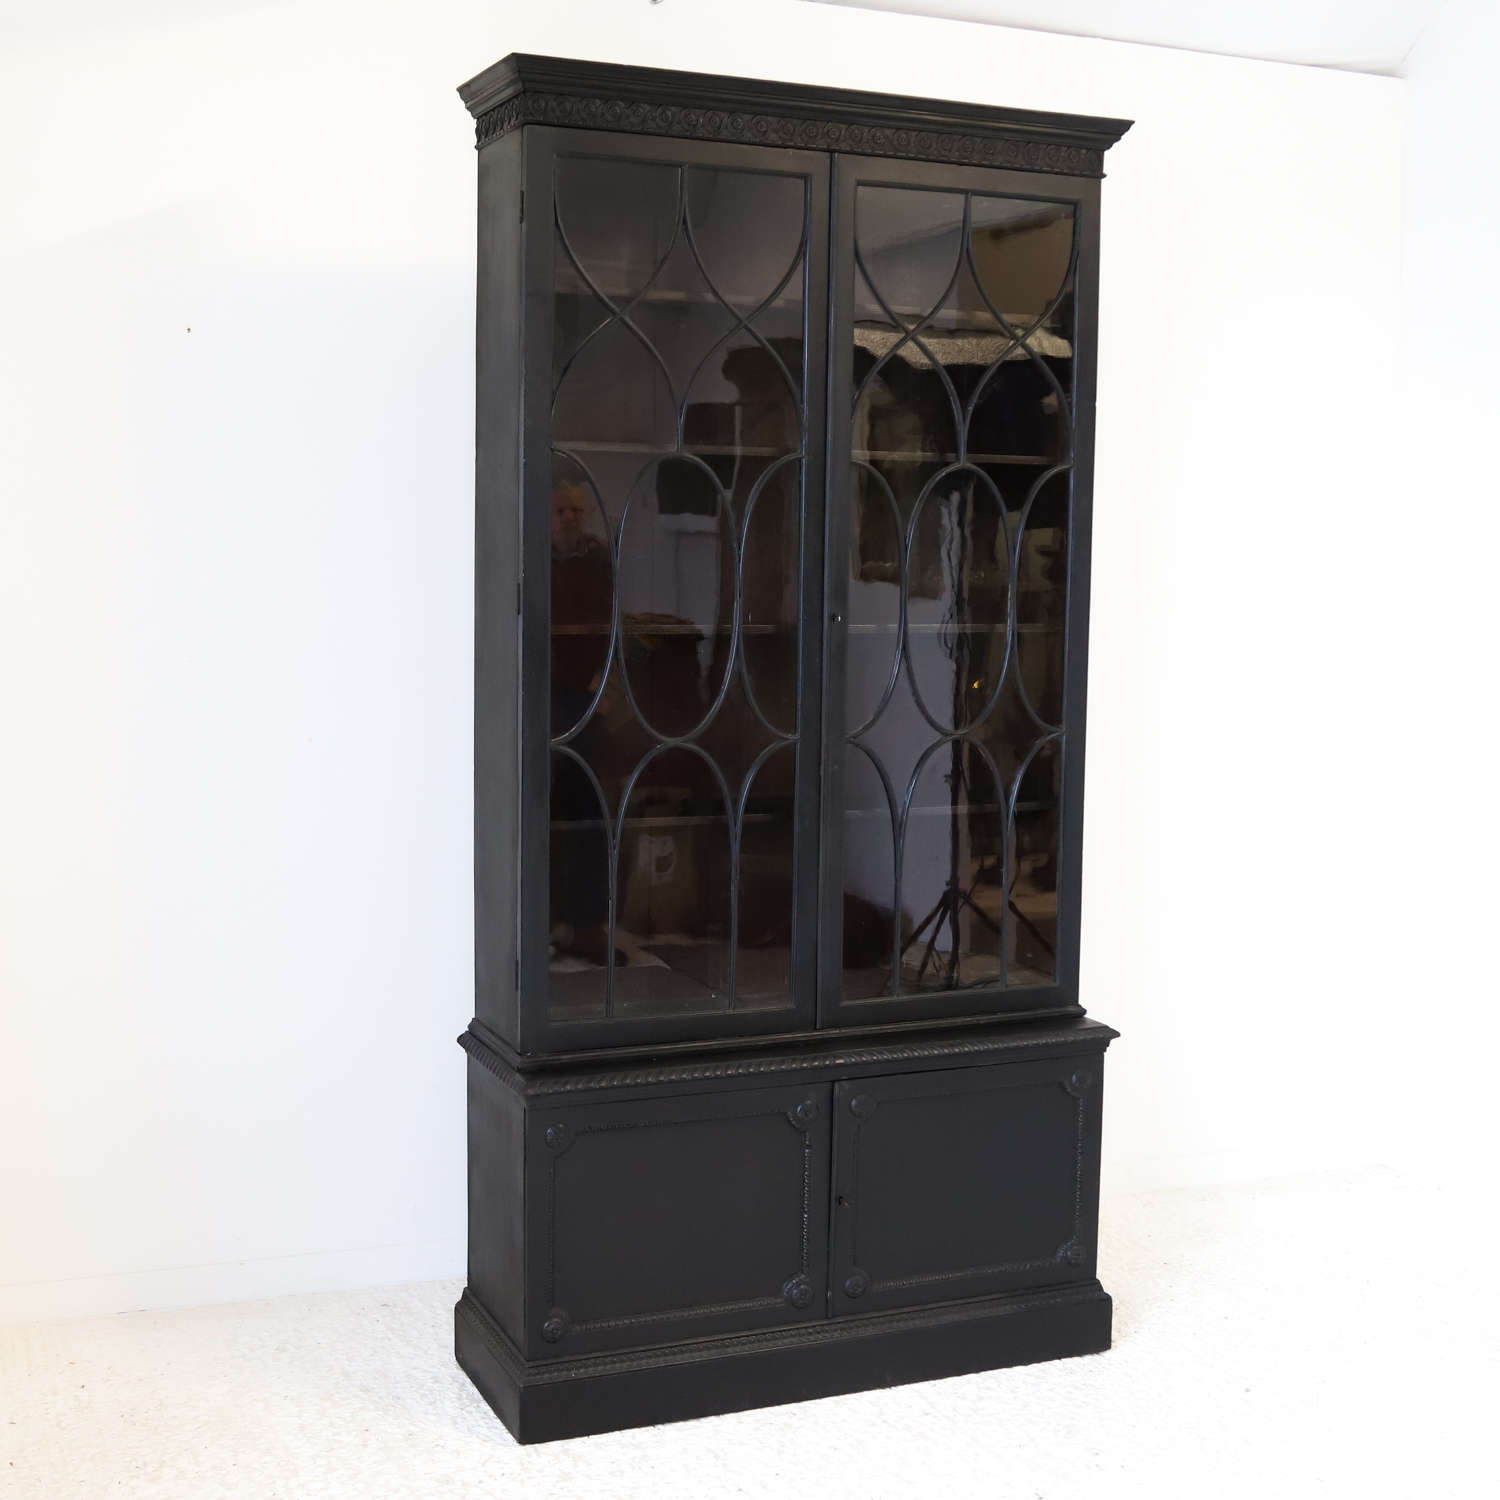 English circa 1900 English Country House Bookcase in black paint